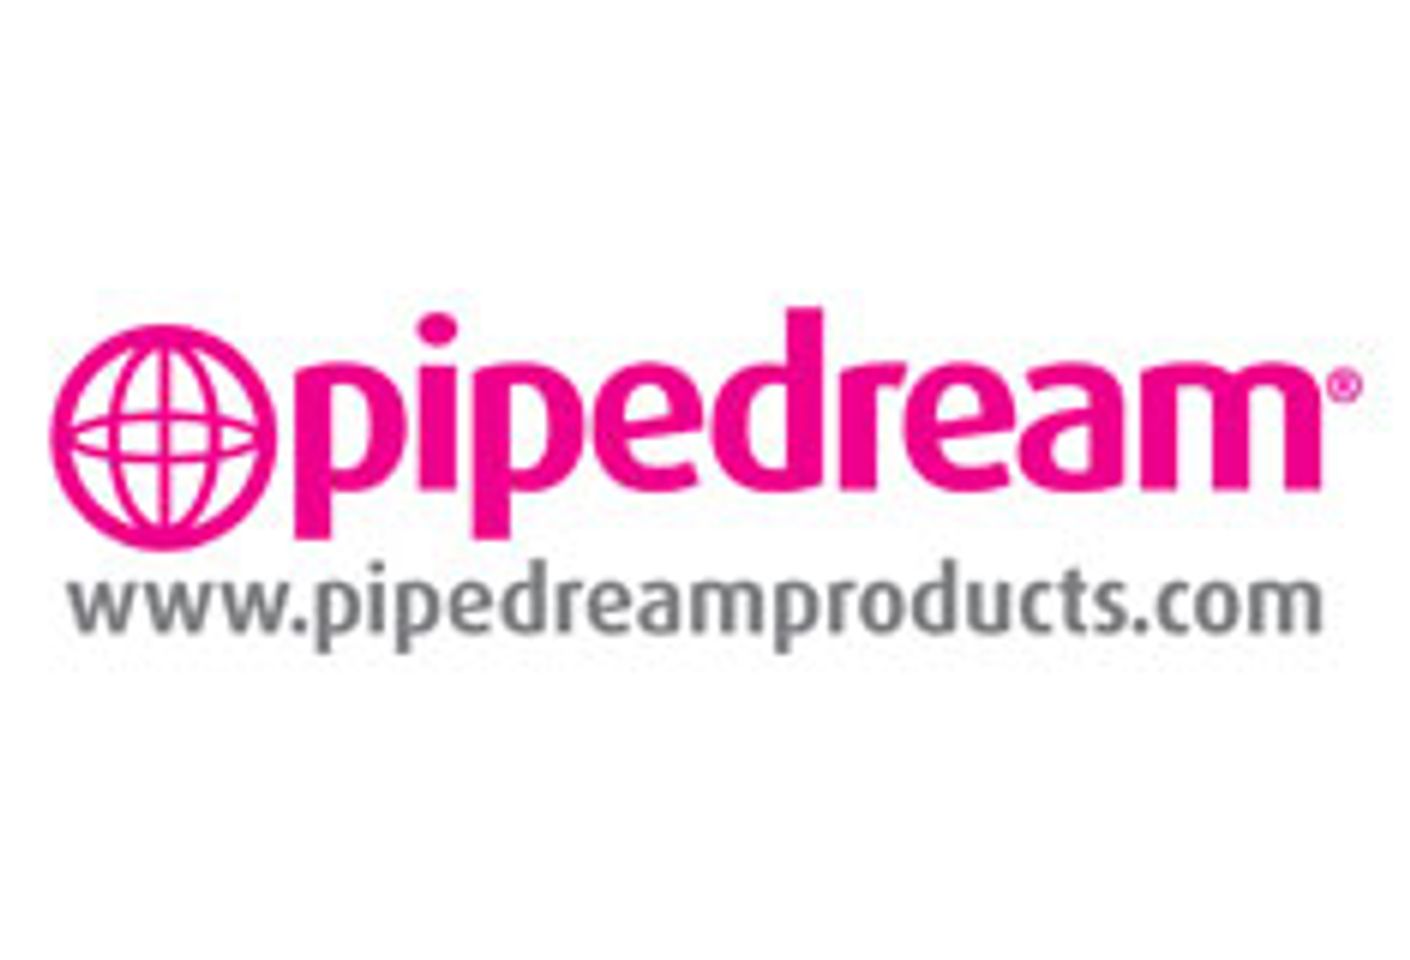 Pipedream Wins Award for Best Alternative Product